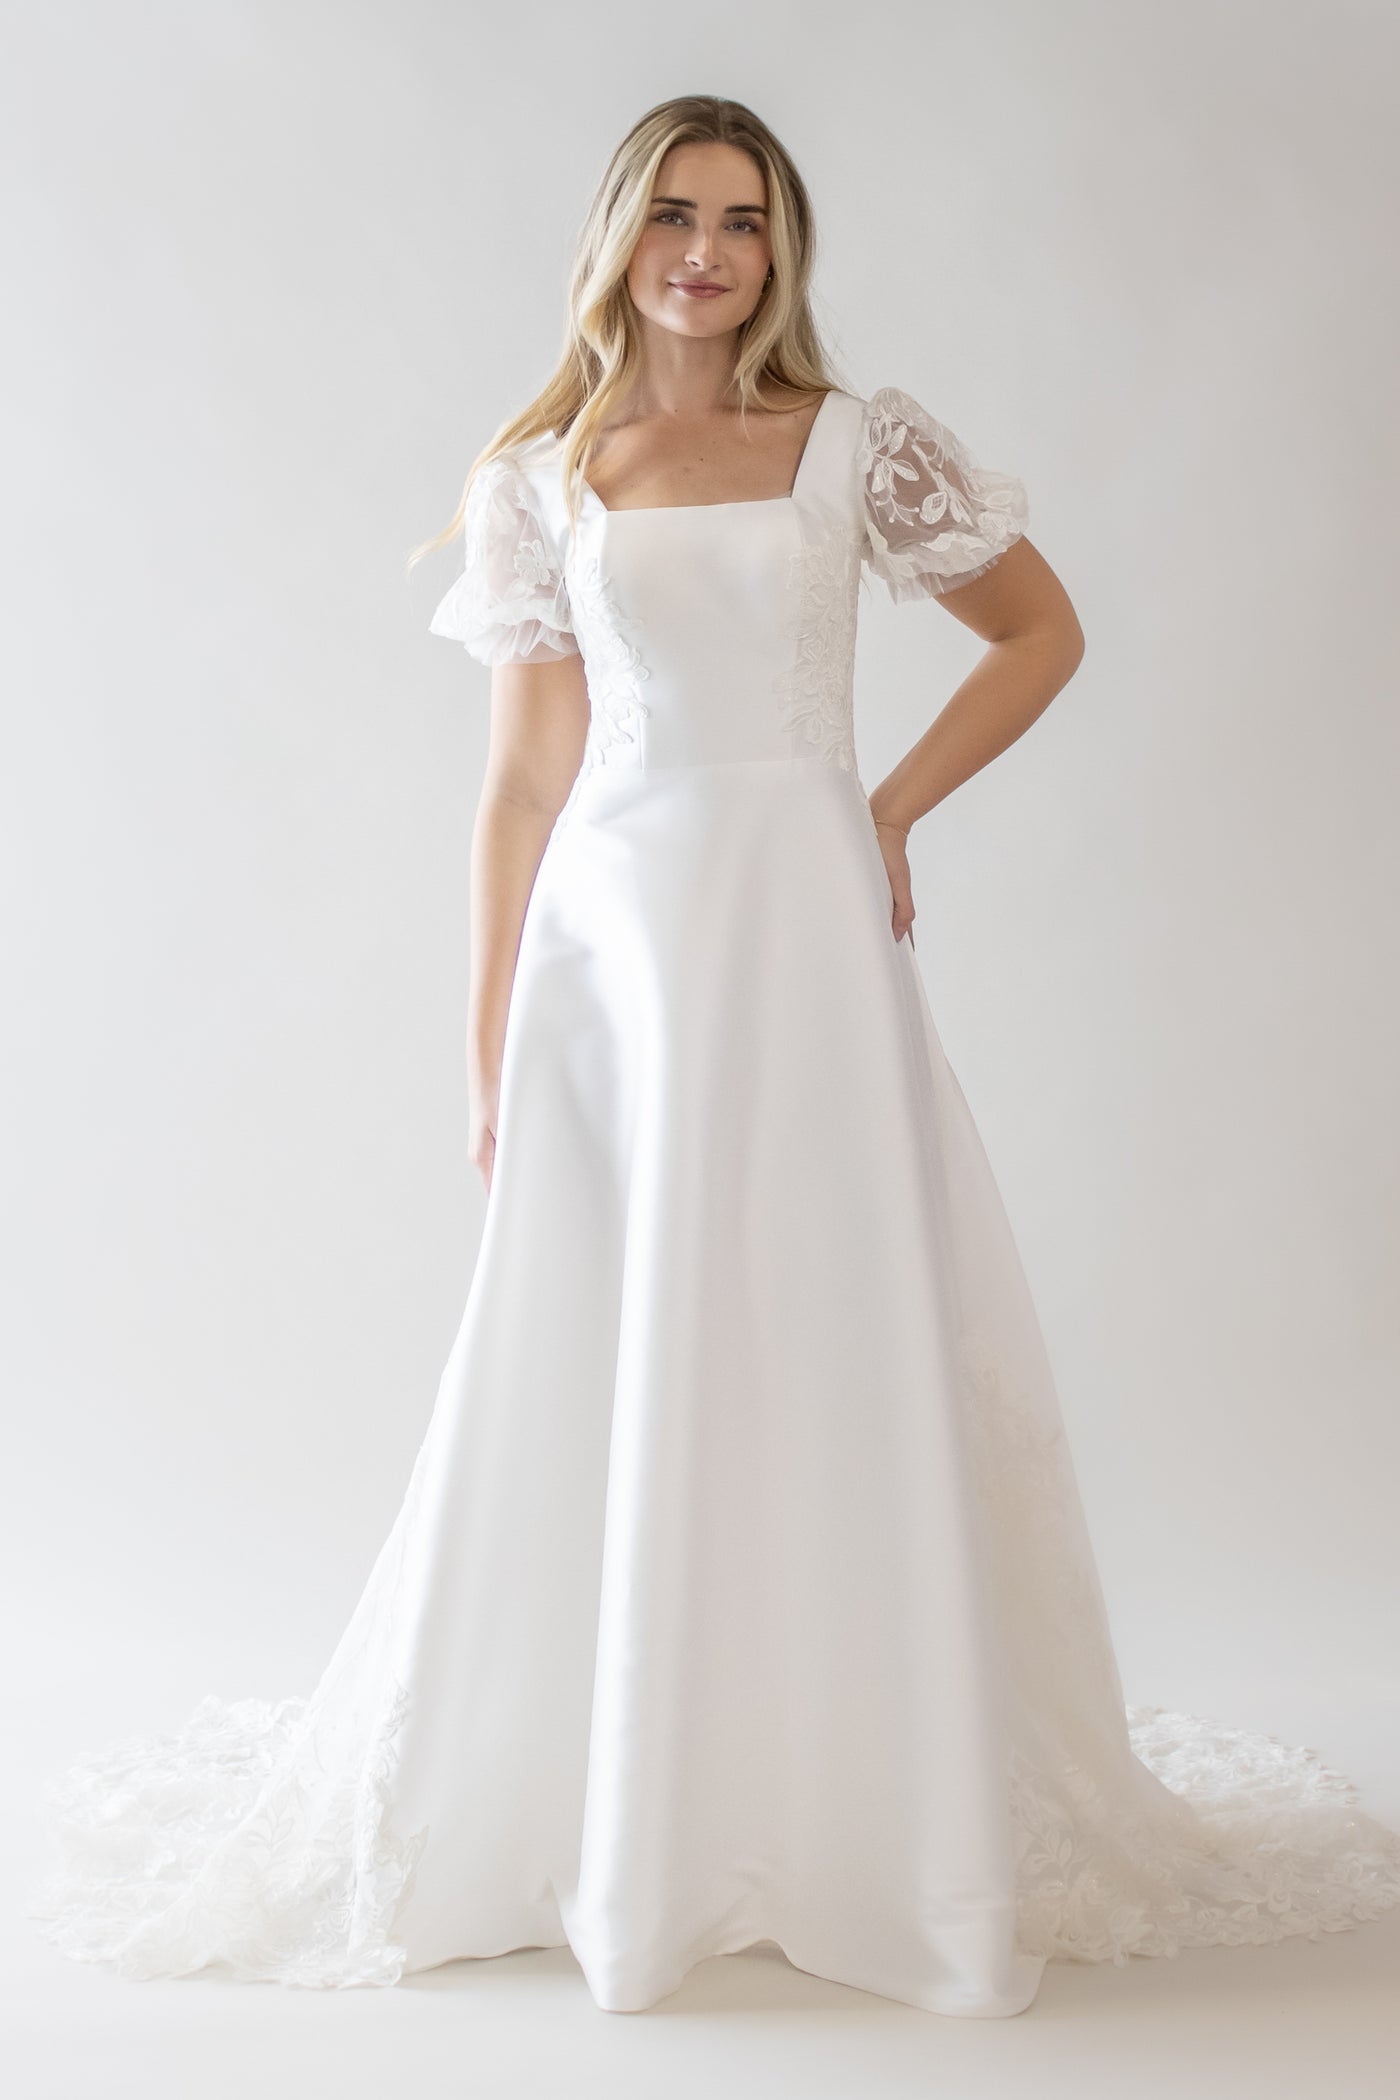 This is a modest wedding dress with a shear lace puff sleeve, square neckline, and an a-line silhouette.